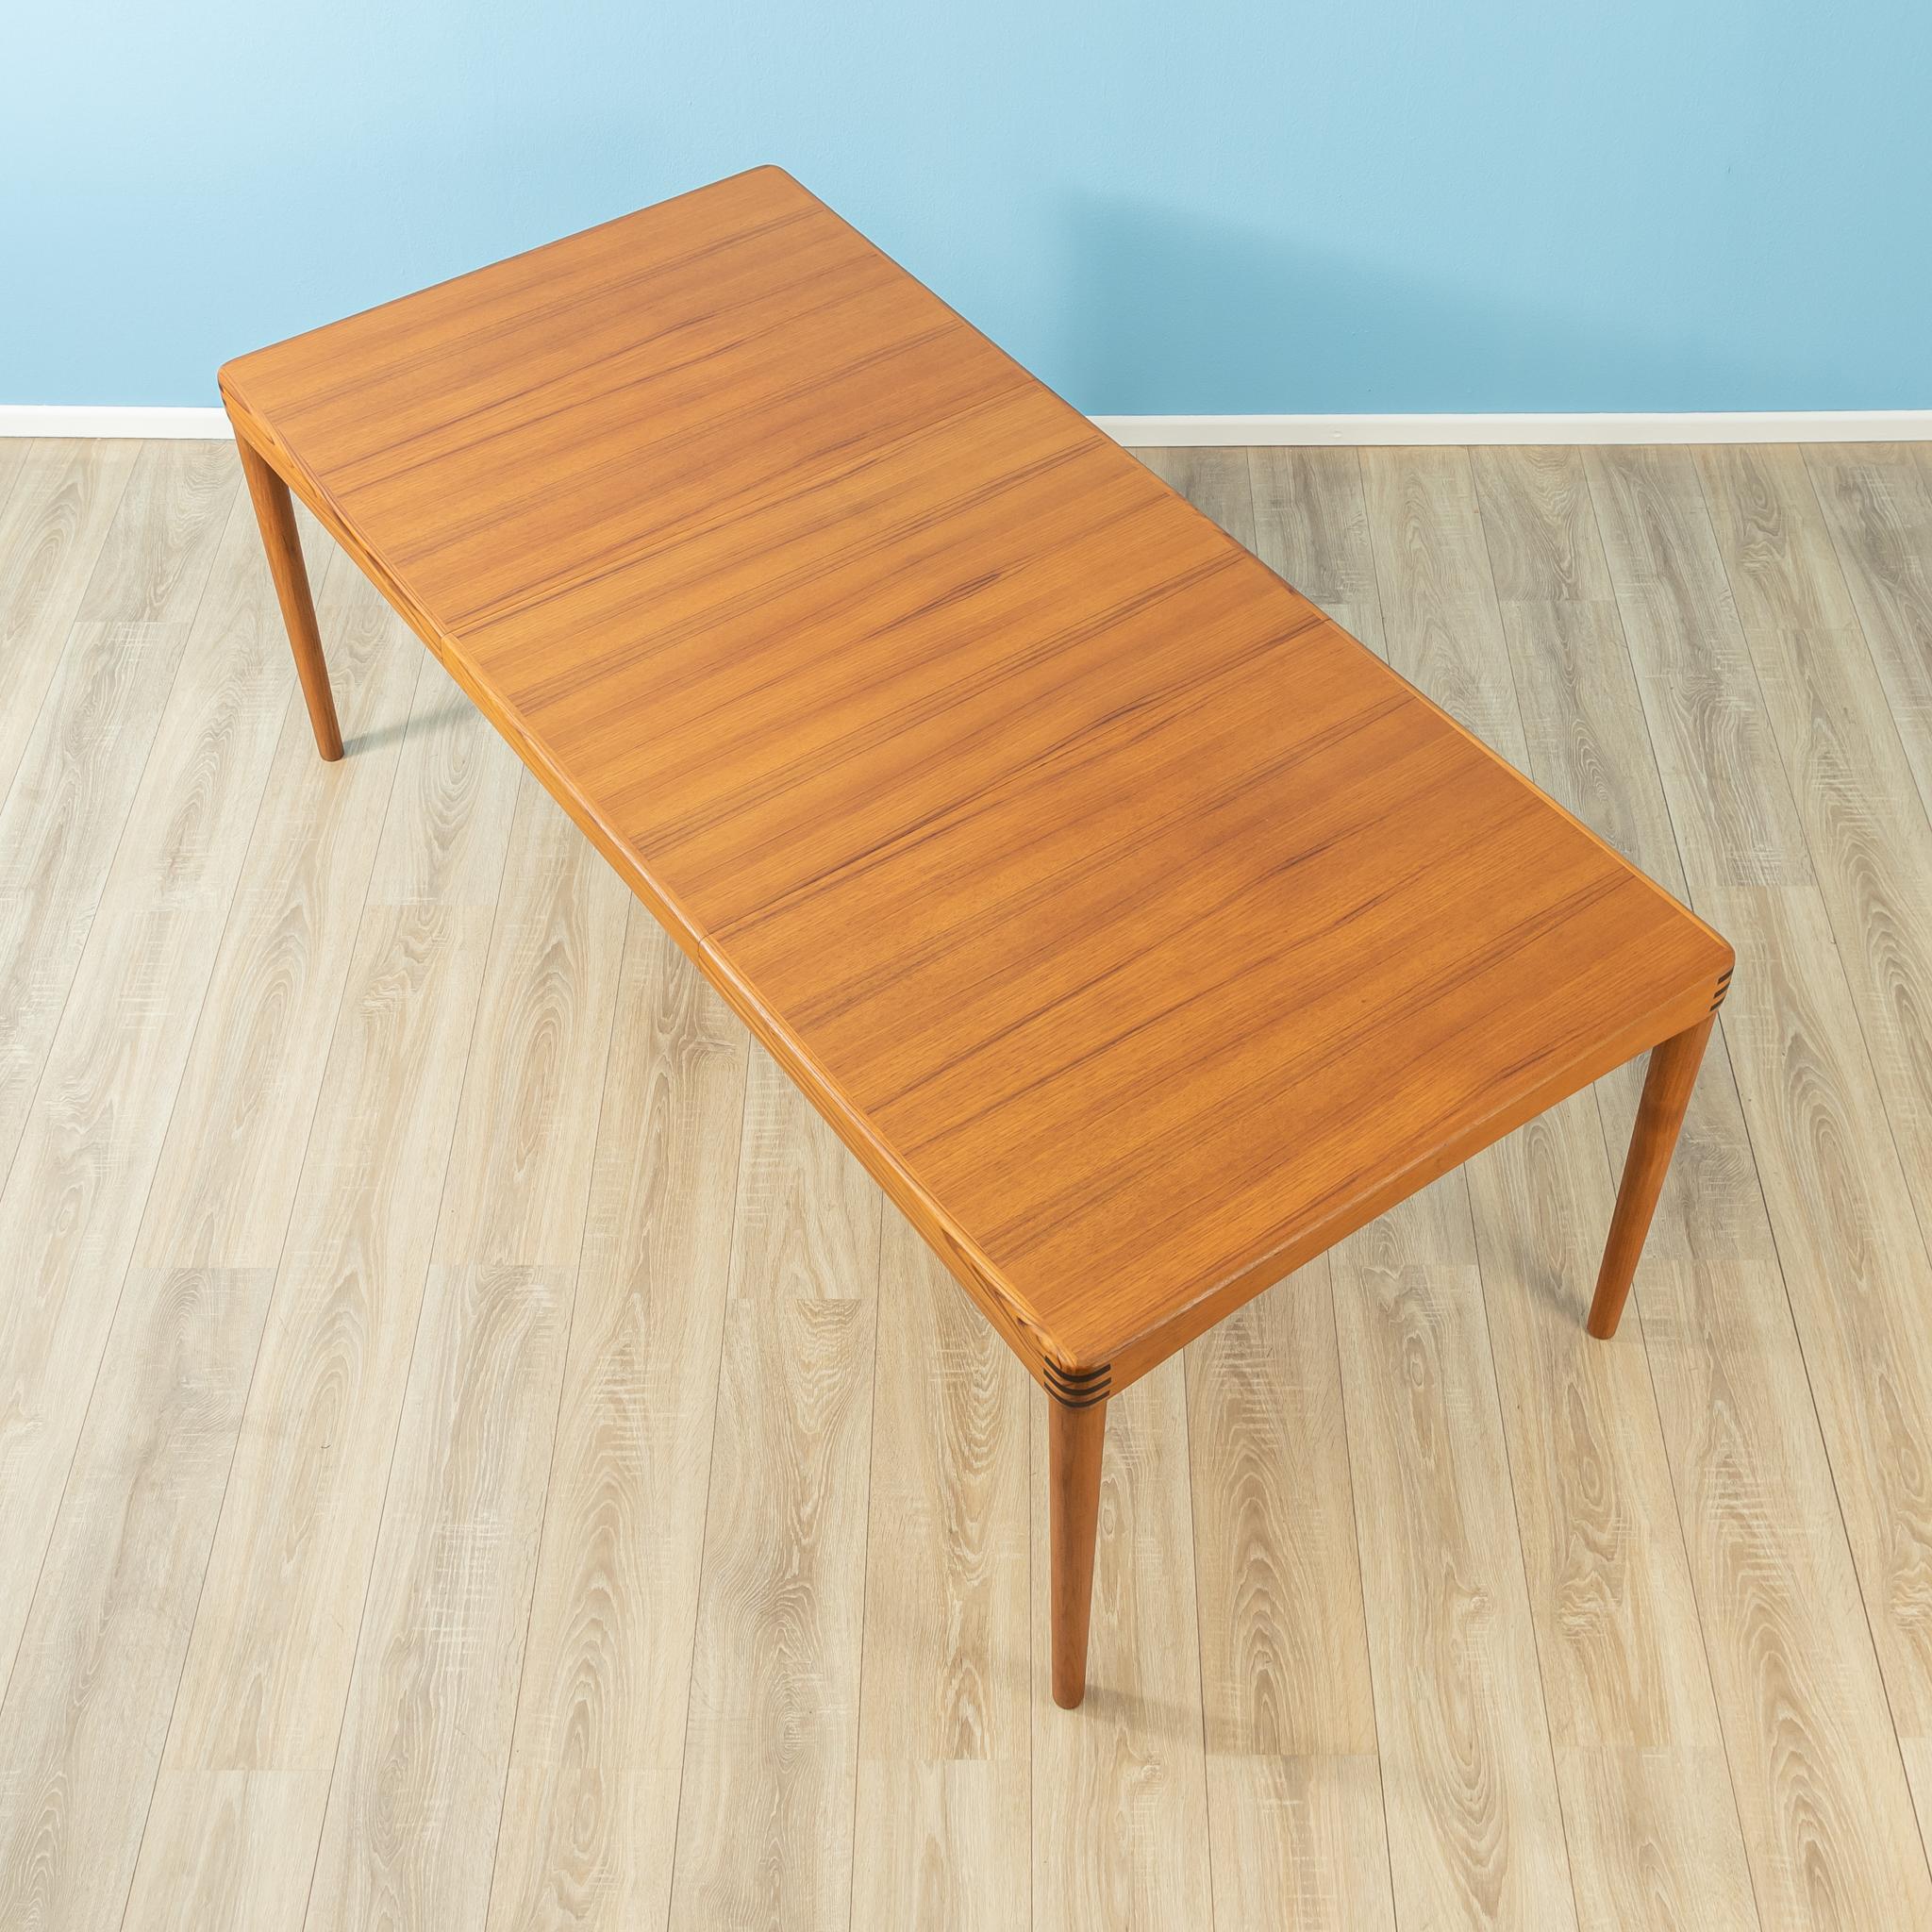 Mid-Century Modern Teak Dining Table from the 1960s Designed by H.W. Klein, Manufactured by Bramin 